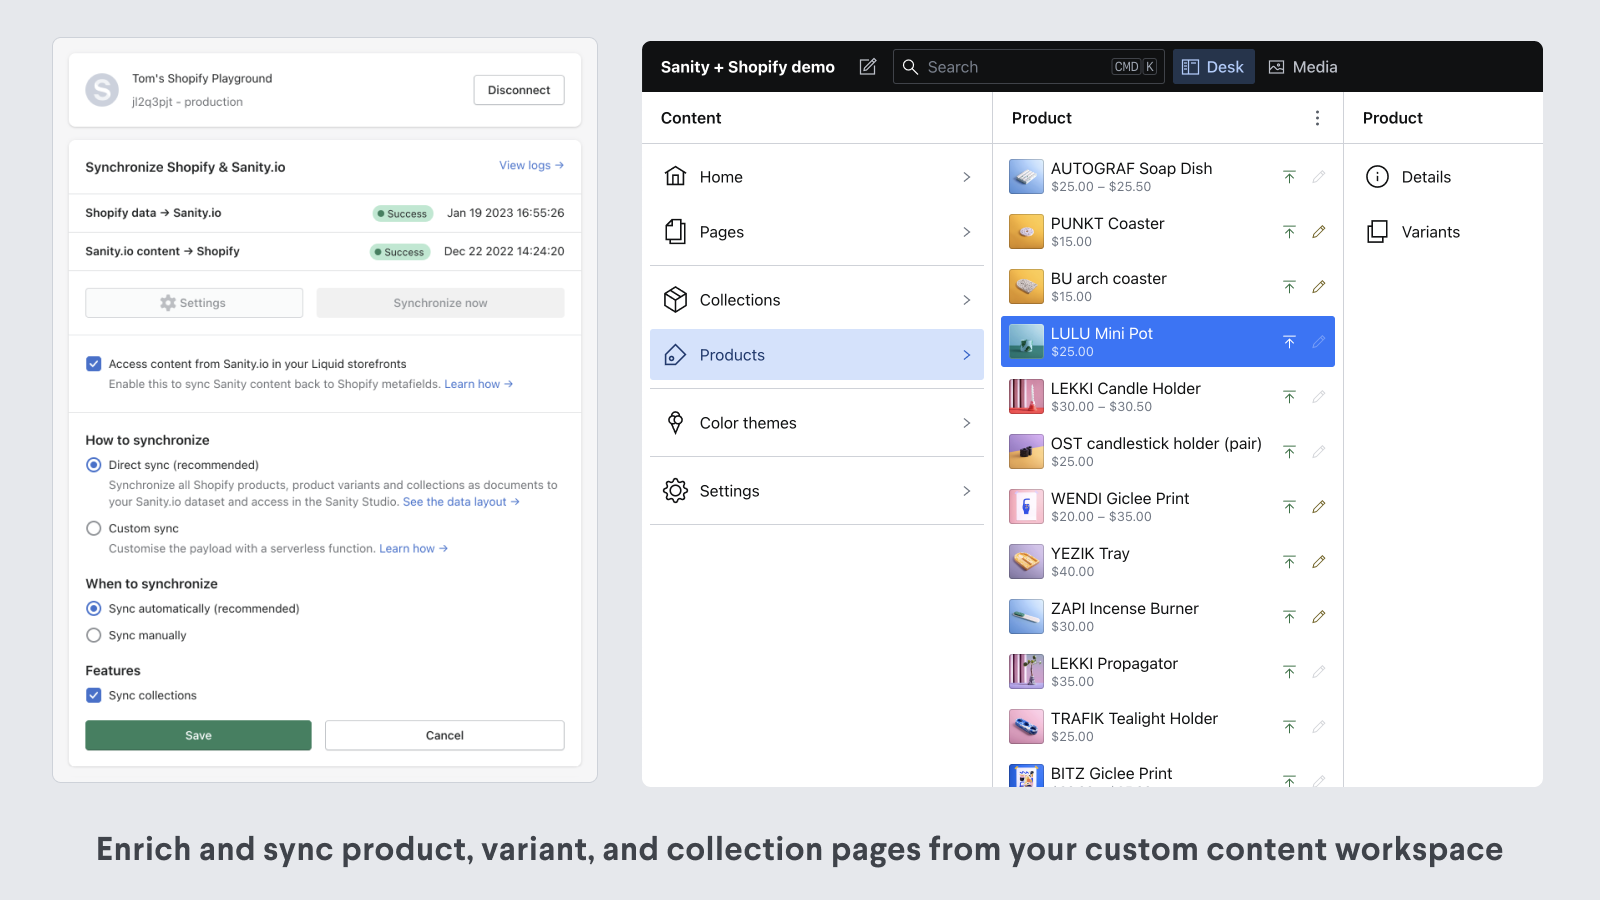 Enrich and sync product, variant, and collection pages